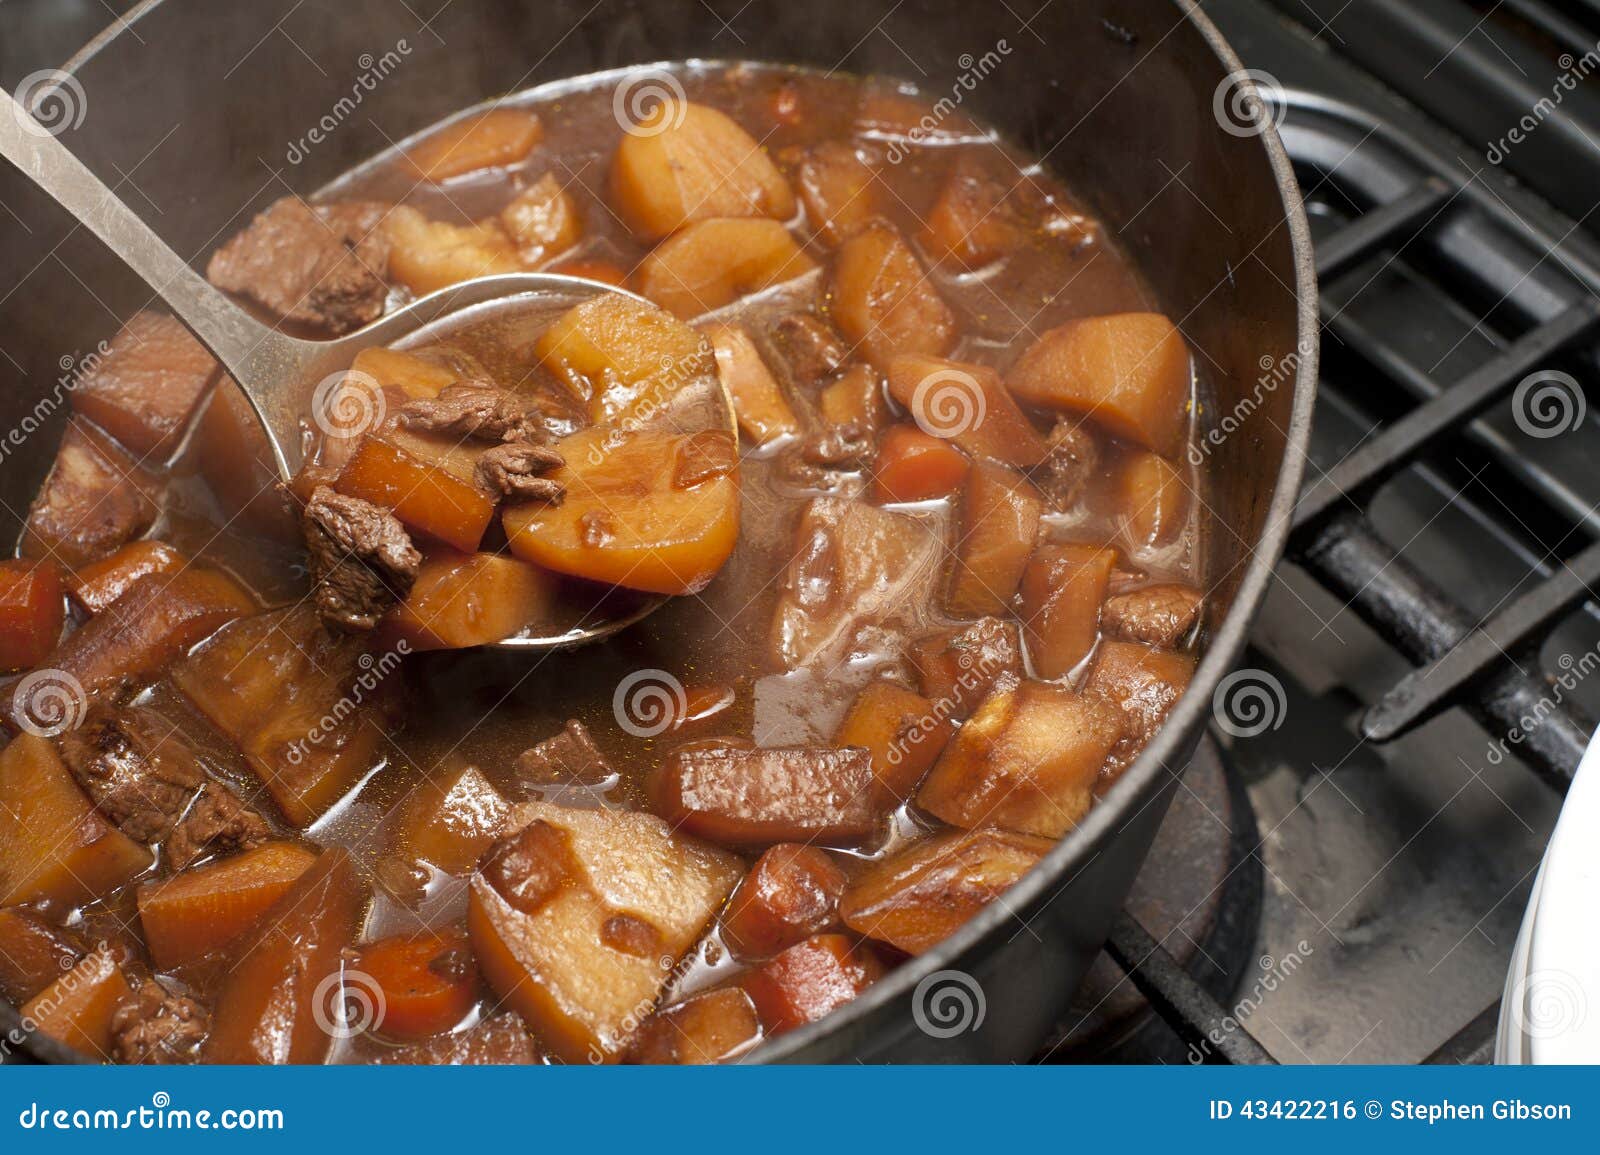 delicious beef stew cooking in a pot